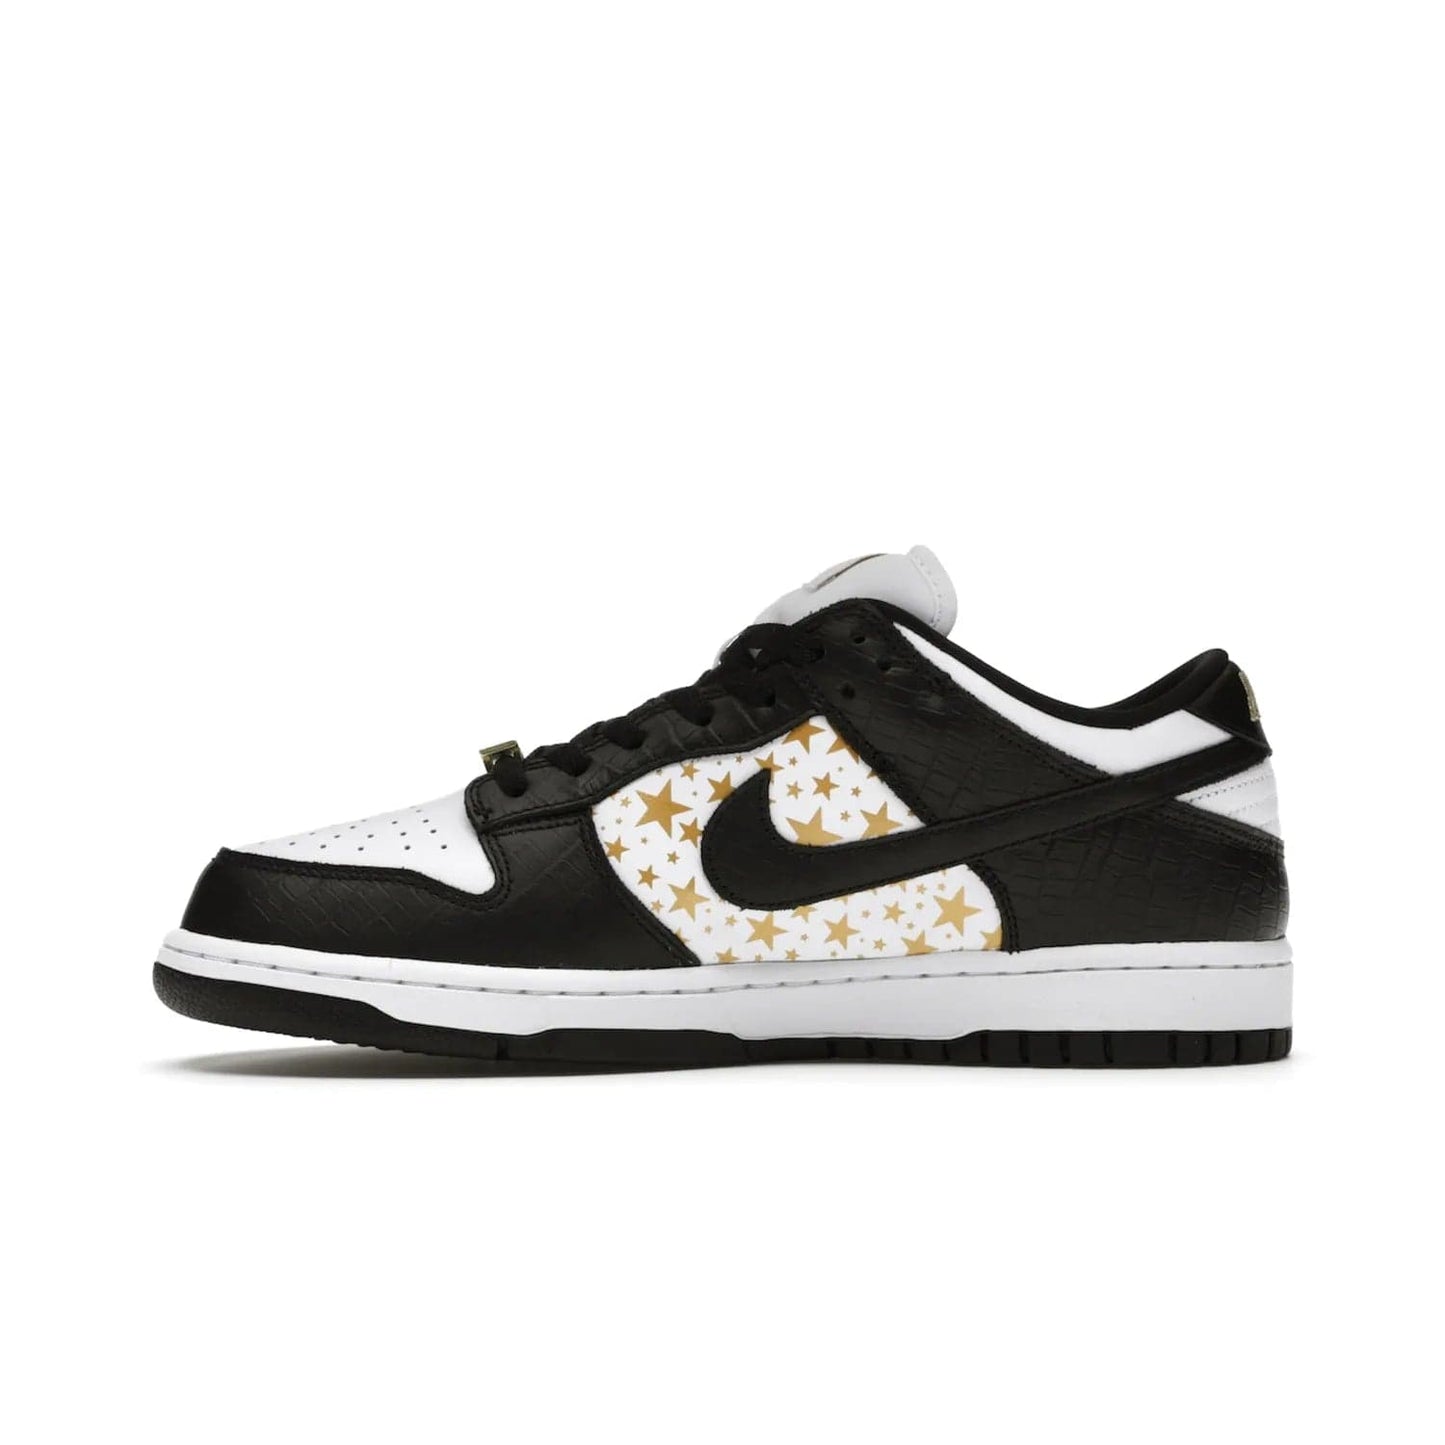 Nike SB Dunk Low Supreme Stars Black (2021) - Image 19 - Only at www.BallersClubKickz.com - Retro style and signature details make the Nike SB Dunk Low Supreme Black a must-have. This special edition shoe features a white leather upper and black croc skin overlays complemented by gold stars and deubré. Enjoy a piece of SB history and grab yours today.